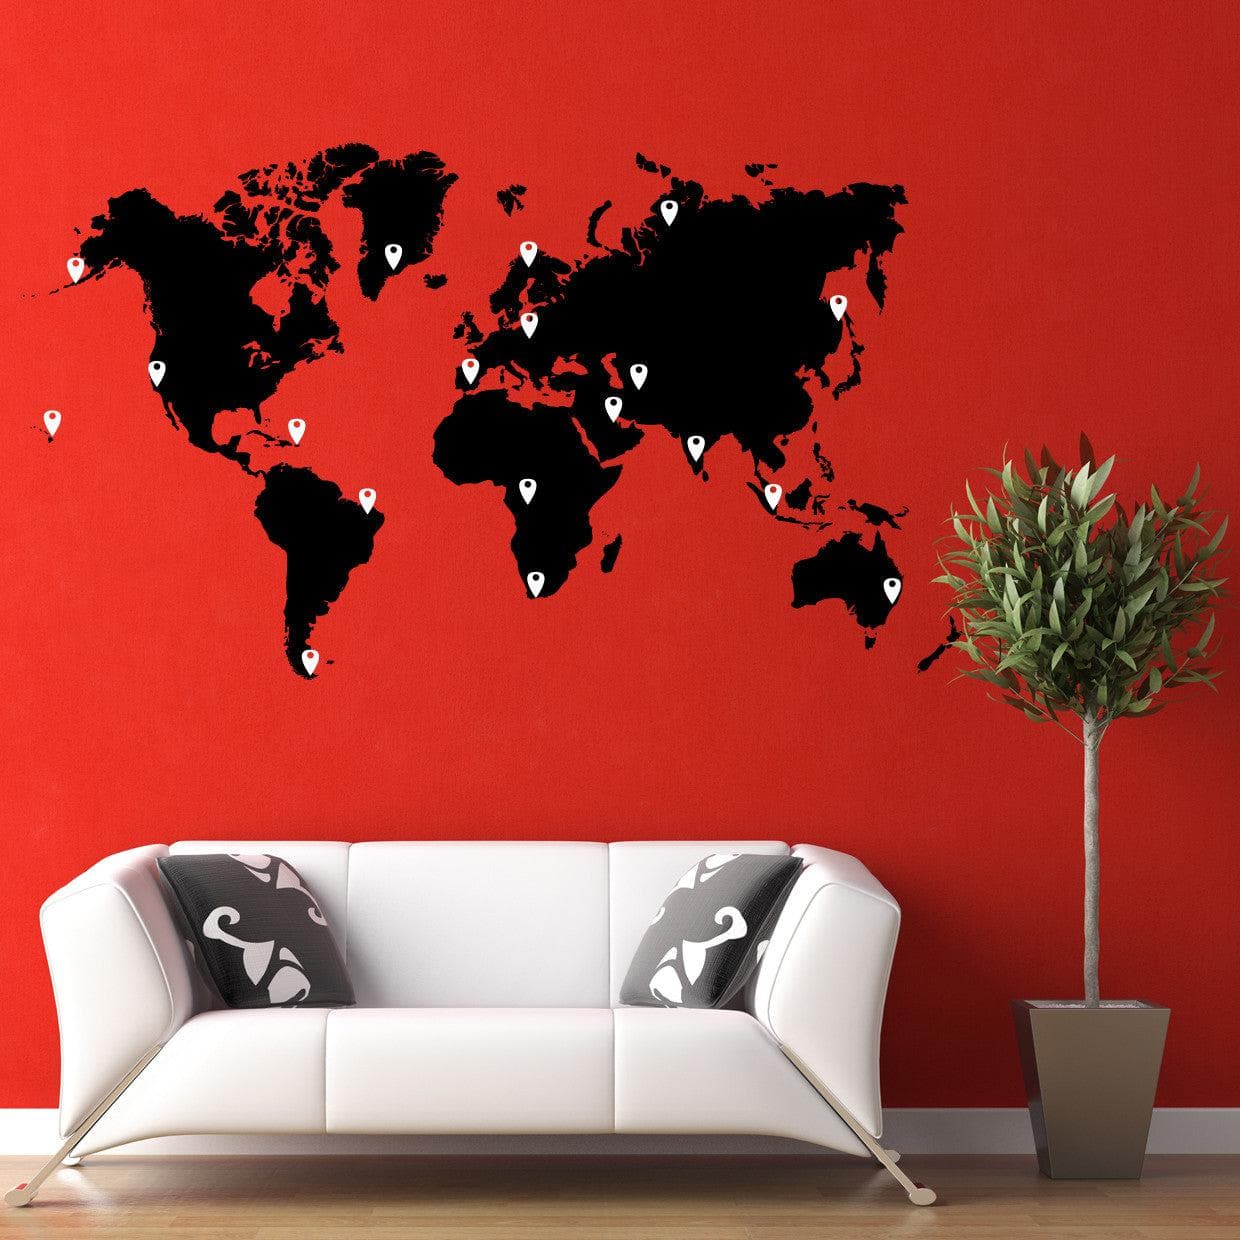 World Map Vinyl Wall Decal World Map With Pins 1822